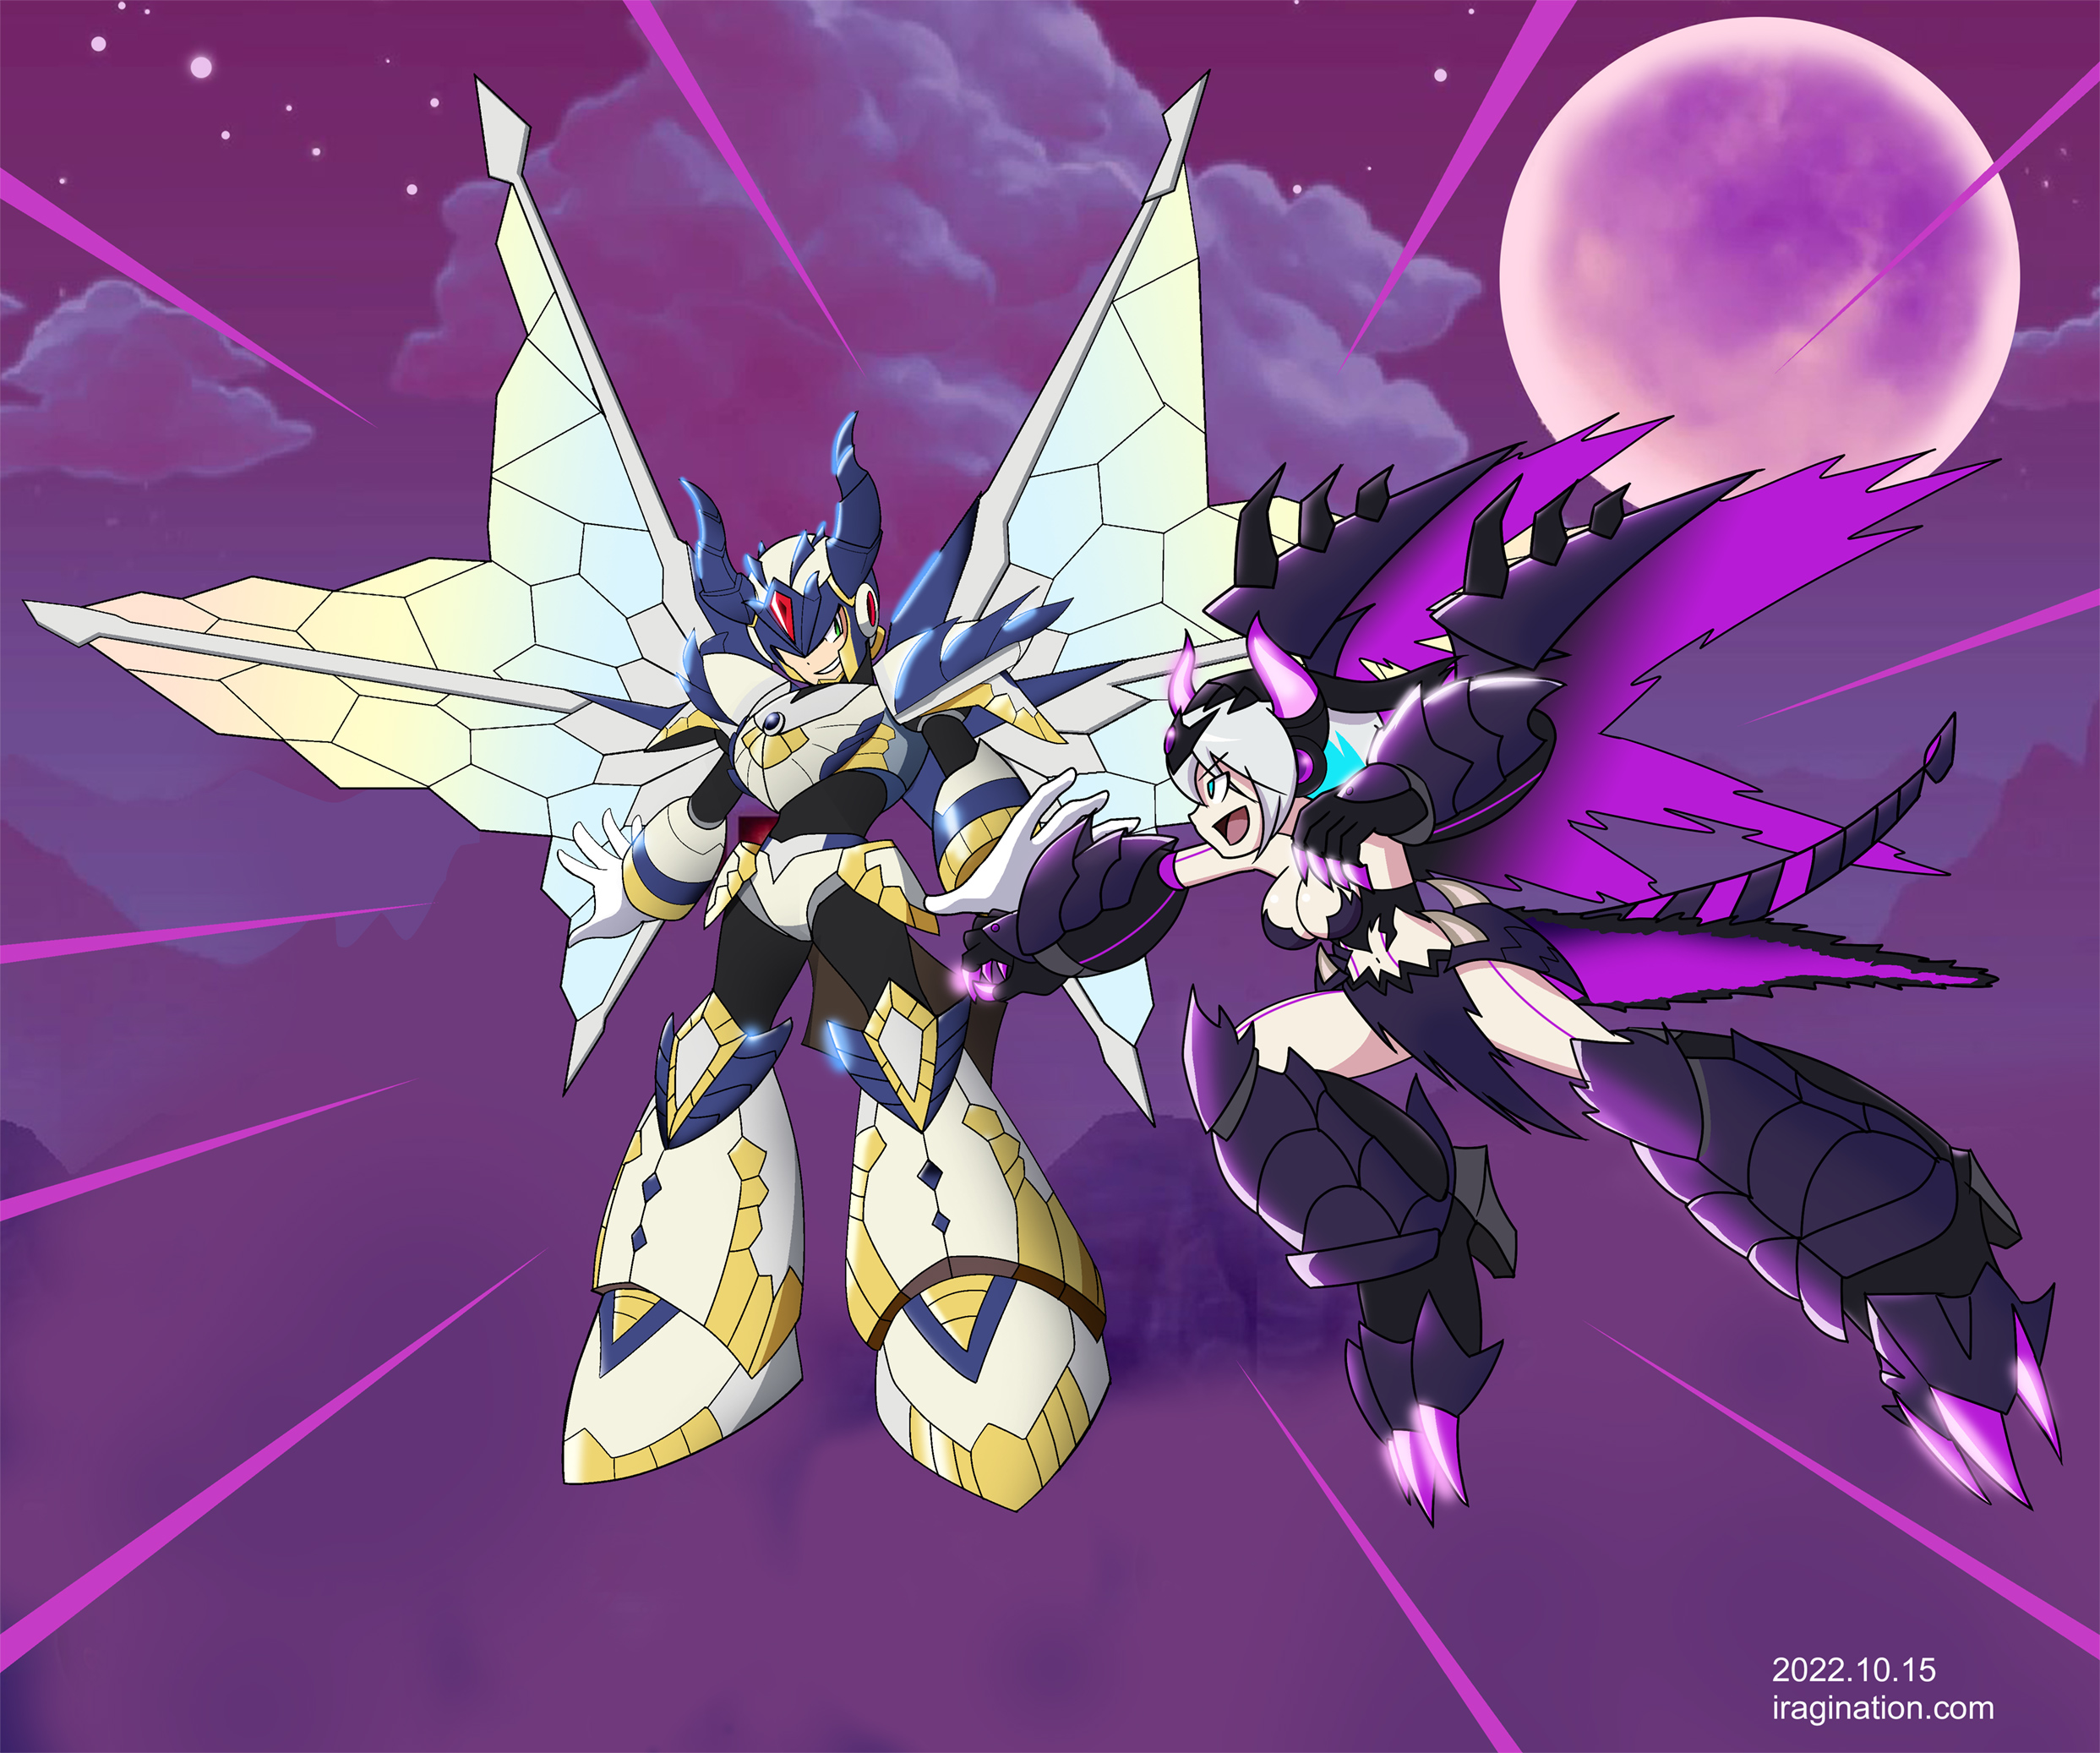 Shagaru Armor X vs Gore Magala iCO
This is an image that I had been working on for way too long, so I had to settle with this to complete it. Luckily, there were no new Rockman X DiVE characters this week. Otherwise, I would have shelved this and moved on to the new content.

For those who are not familiar with this, on the left, there is [url=https://www.facebook.com/CAPCOM.RXD/videos/1254958842014960]Shagaru Armor X[/url], and on the right [url=https://www.facebook.com/CAPCOM.RXD/videos/847914319544696]Gore Magala iCO[/url]. They were released as playable characters for a recent [b]ROCKMAN X DiVE[/b] collaboration with [b]Monster Hunter Rise Sunbreak[/b].

I have no idea about the [b]Monster Hunter[/b] series, but at least the writing staff returned, and the event had some funny dialogue. Essentially, by the end, they were so excited about their powers that they were teasing each other to test their strength, Dragon Ball Z style.

An interesting development during this event is that apparently, the main cast (X, Zero and Iris) are the actual characters from the Mega Man X series, not Hunter Programs, who travel to the Deep Log from their real universe. When they return, they forget everything that happened. I am not sure what this means for the apparently sentient Hunter Program characters like Axl early in the game. I’d rather not read much into it.

The background image was taken from the game stage with some minor modifications.

Mega Man X DiVE © CAPCOM
Keywords: x ico